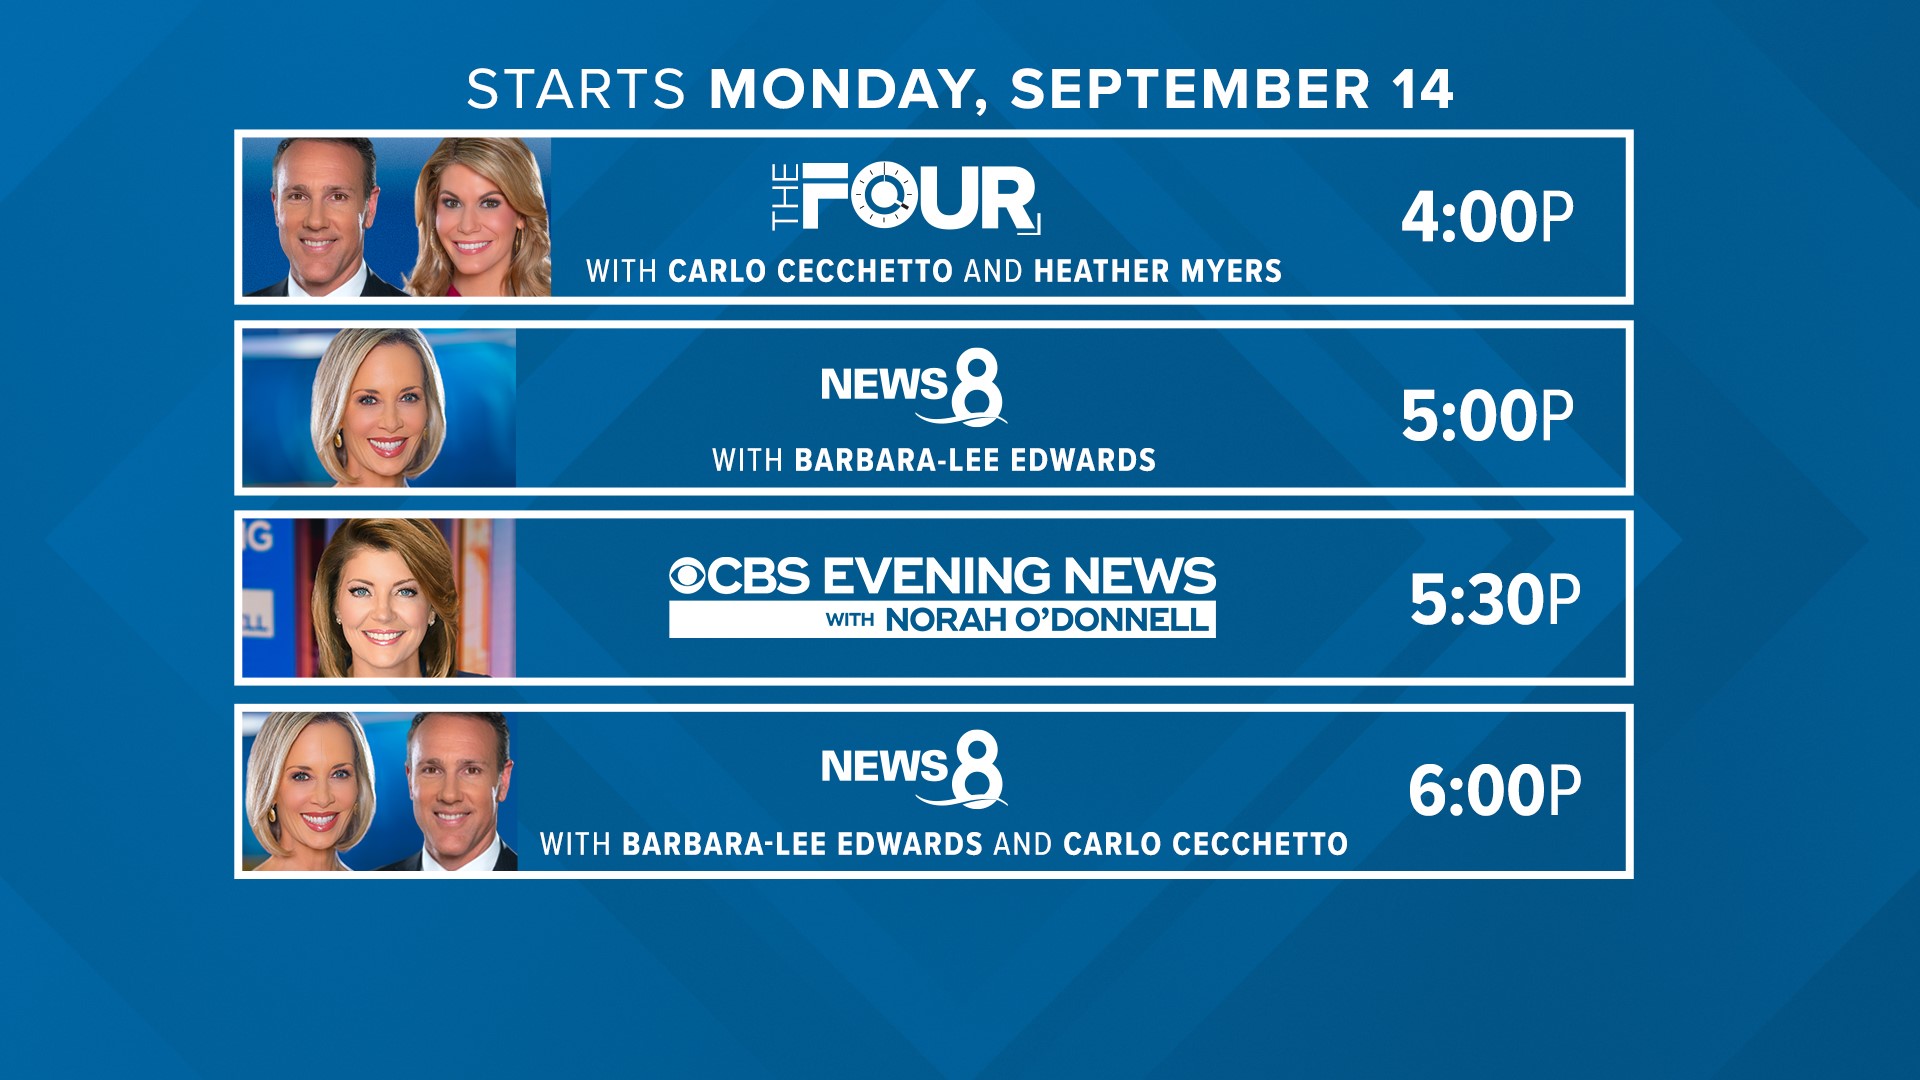 Big changes to the weekday lineup on CBS 8!